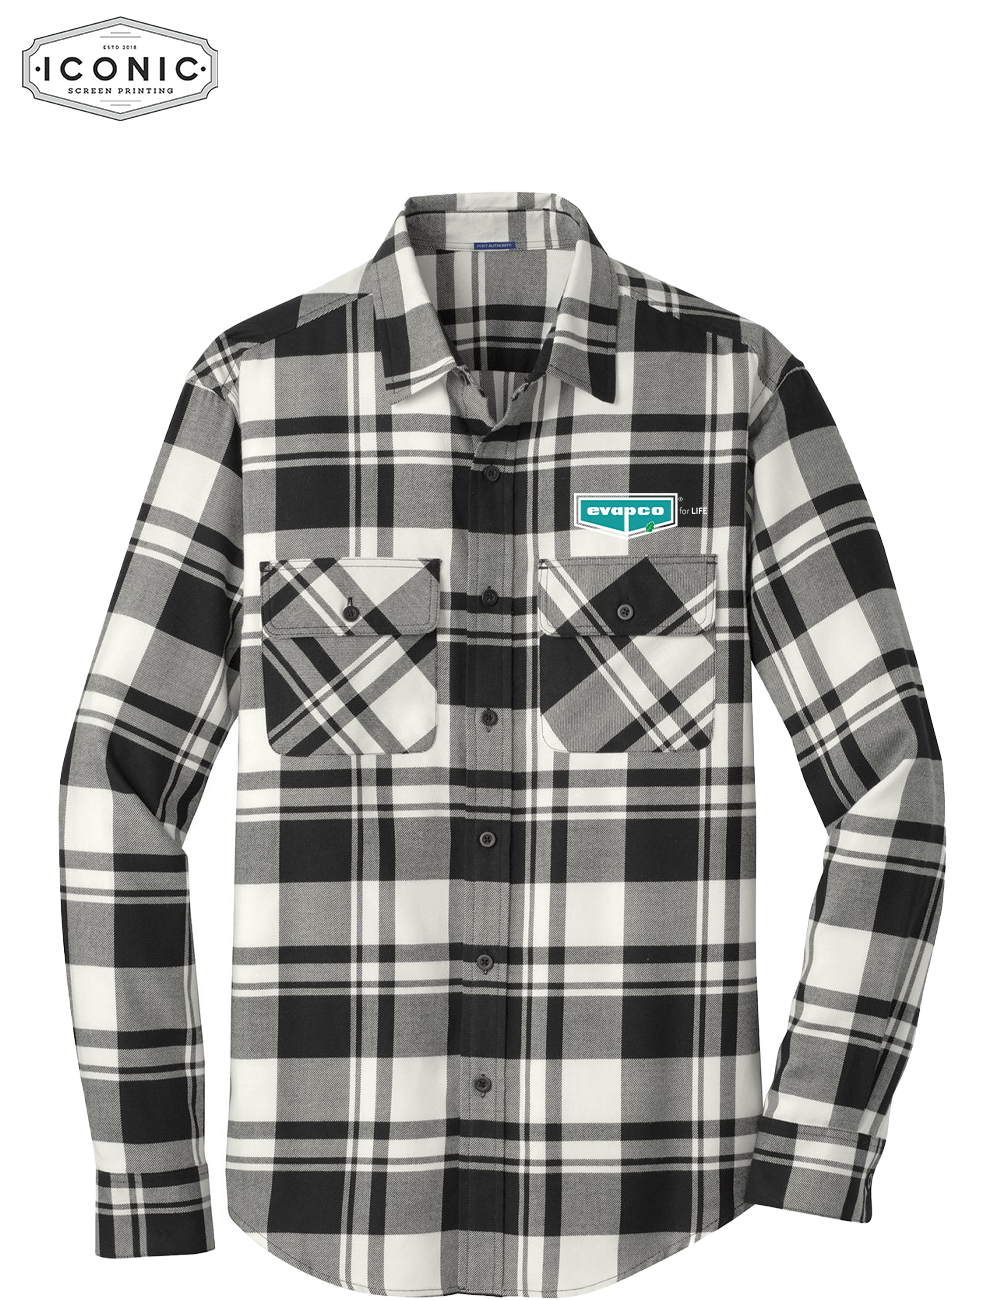 Evapco for Life - Plaid Flannel Shirt - Embroidery